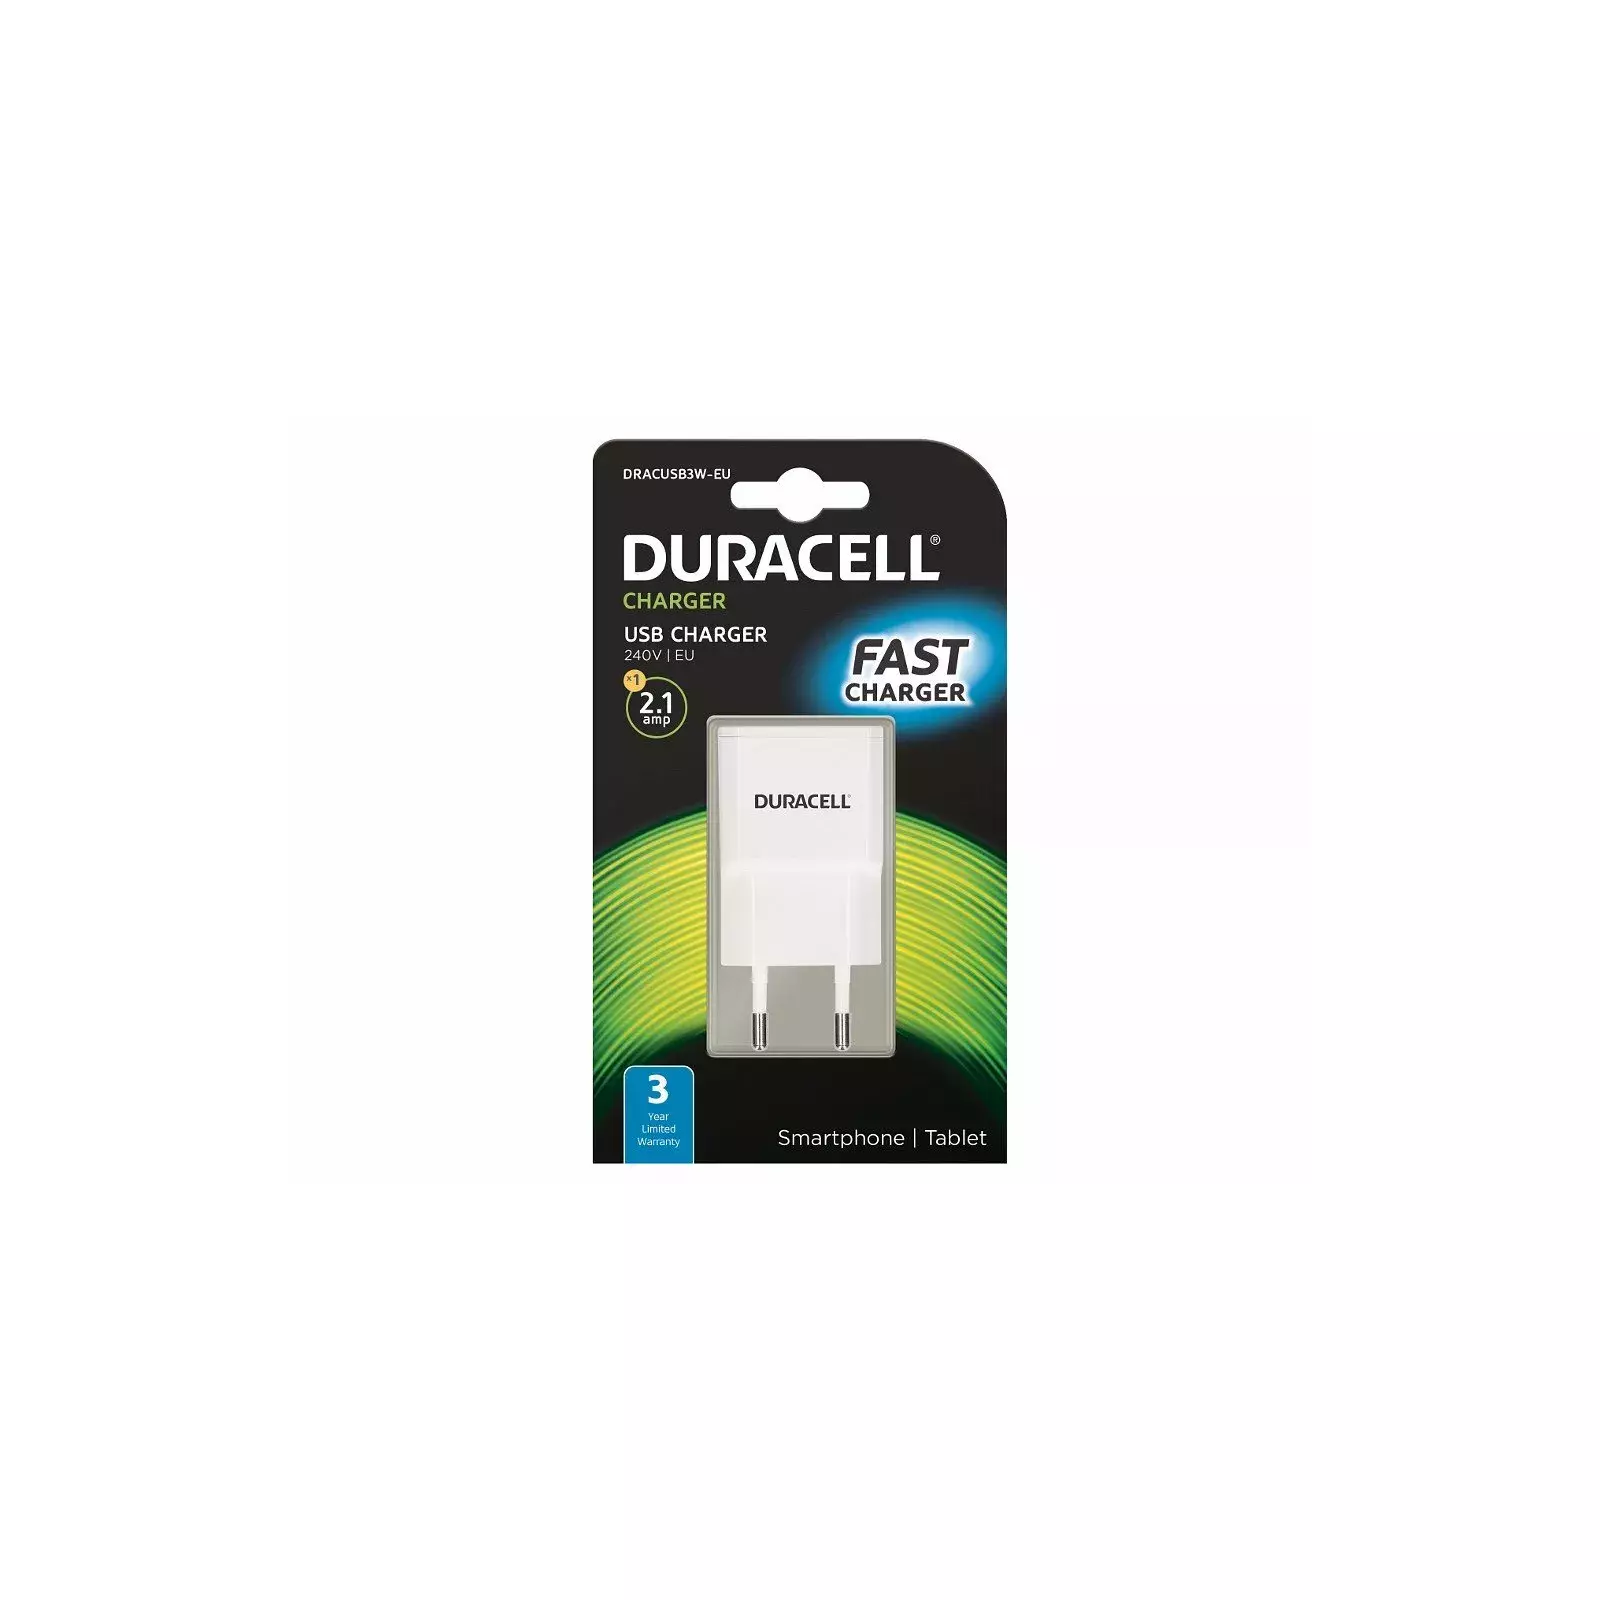 Duracell  USB Phone/Tablet Charger DRACUSB3W-EU | Battery chargers |  